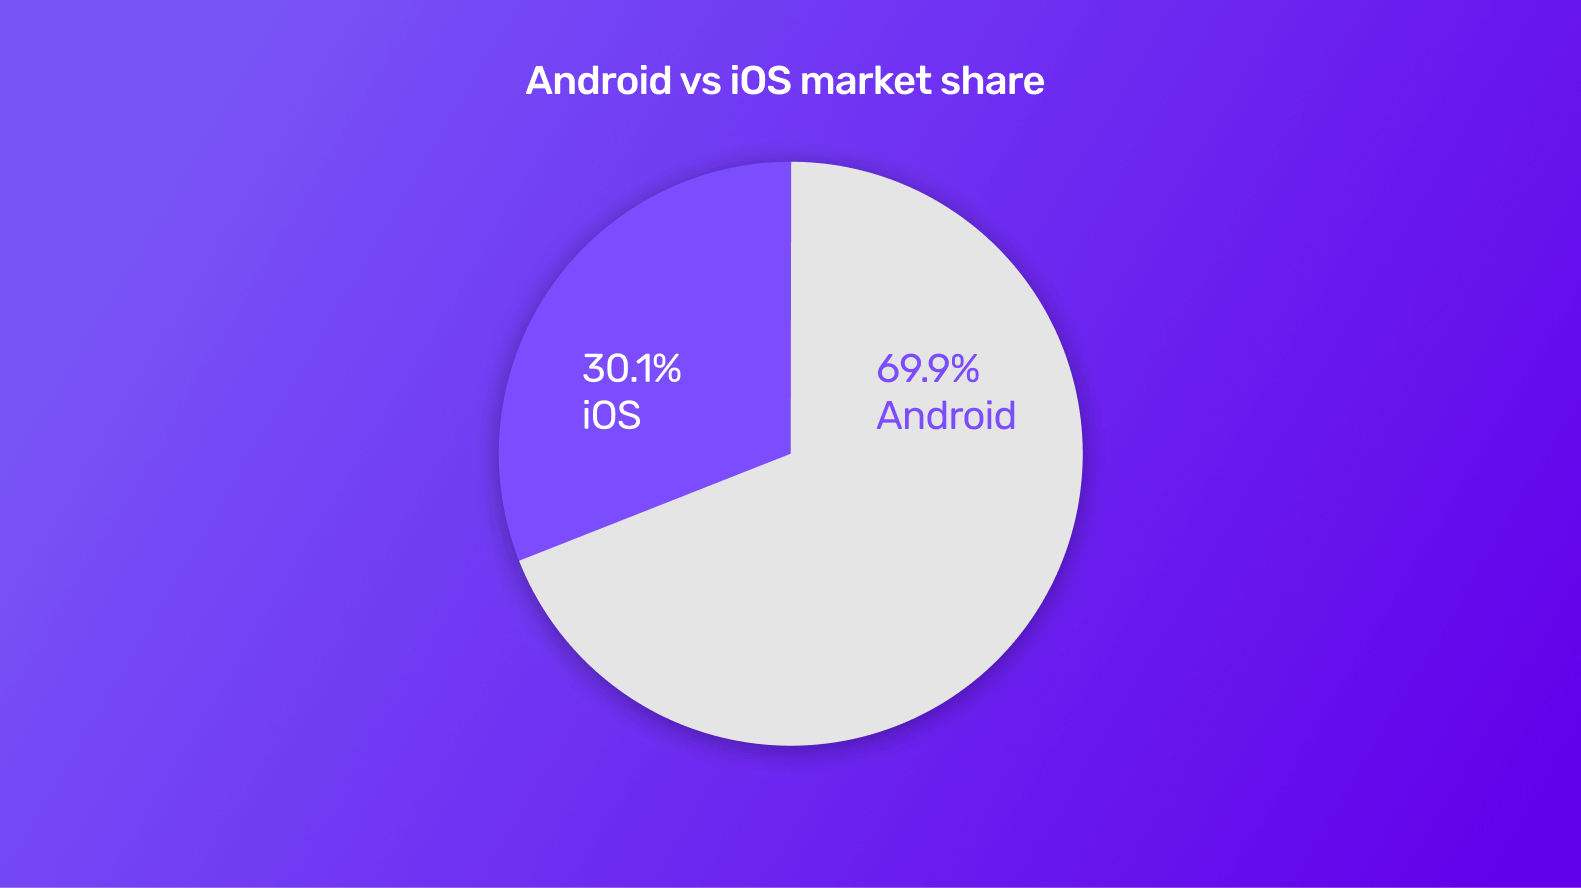 Android vs iOS market share comparison on a pie chart